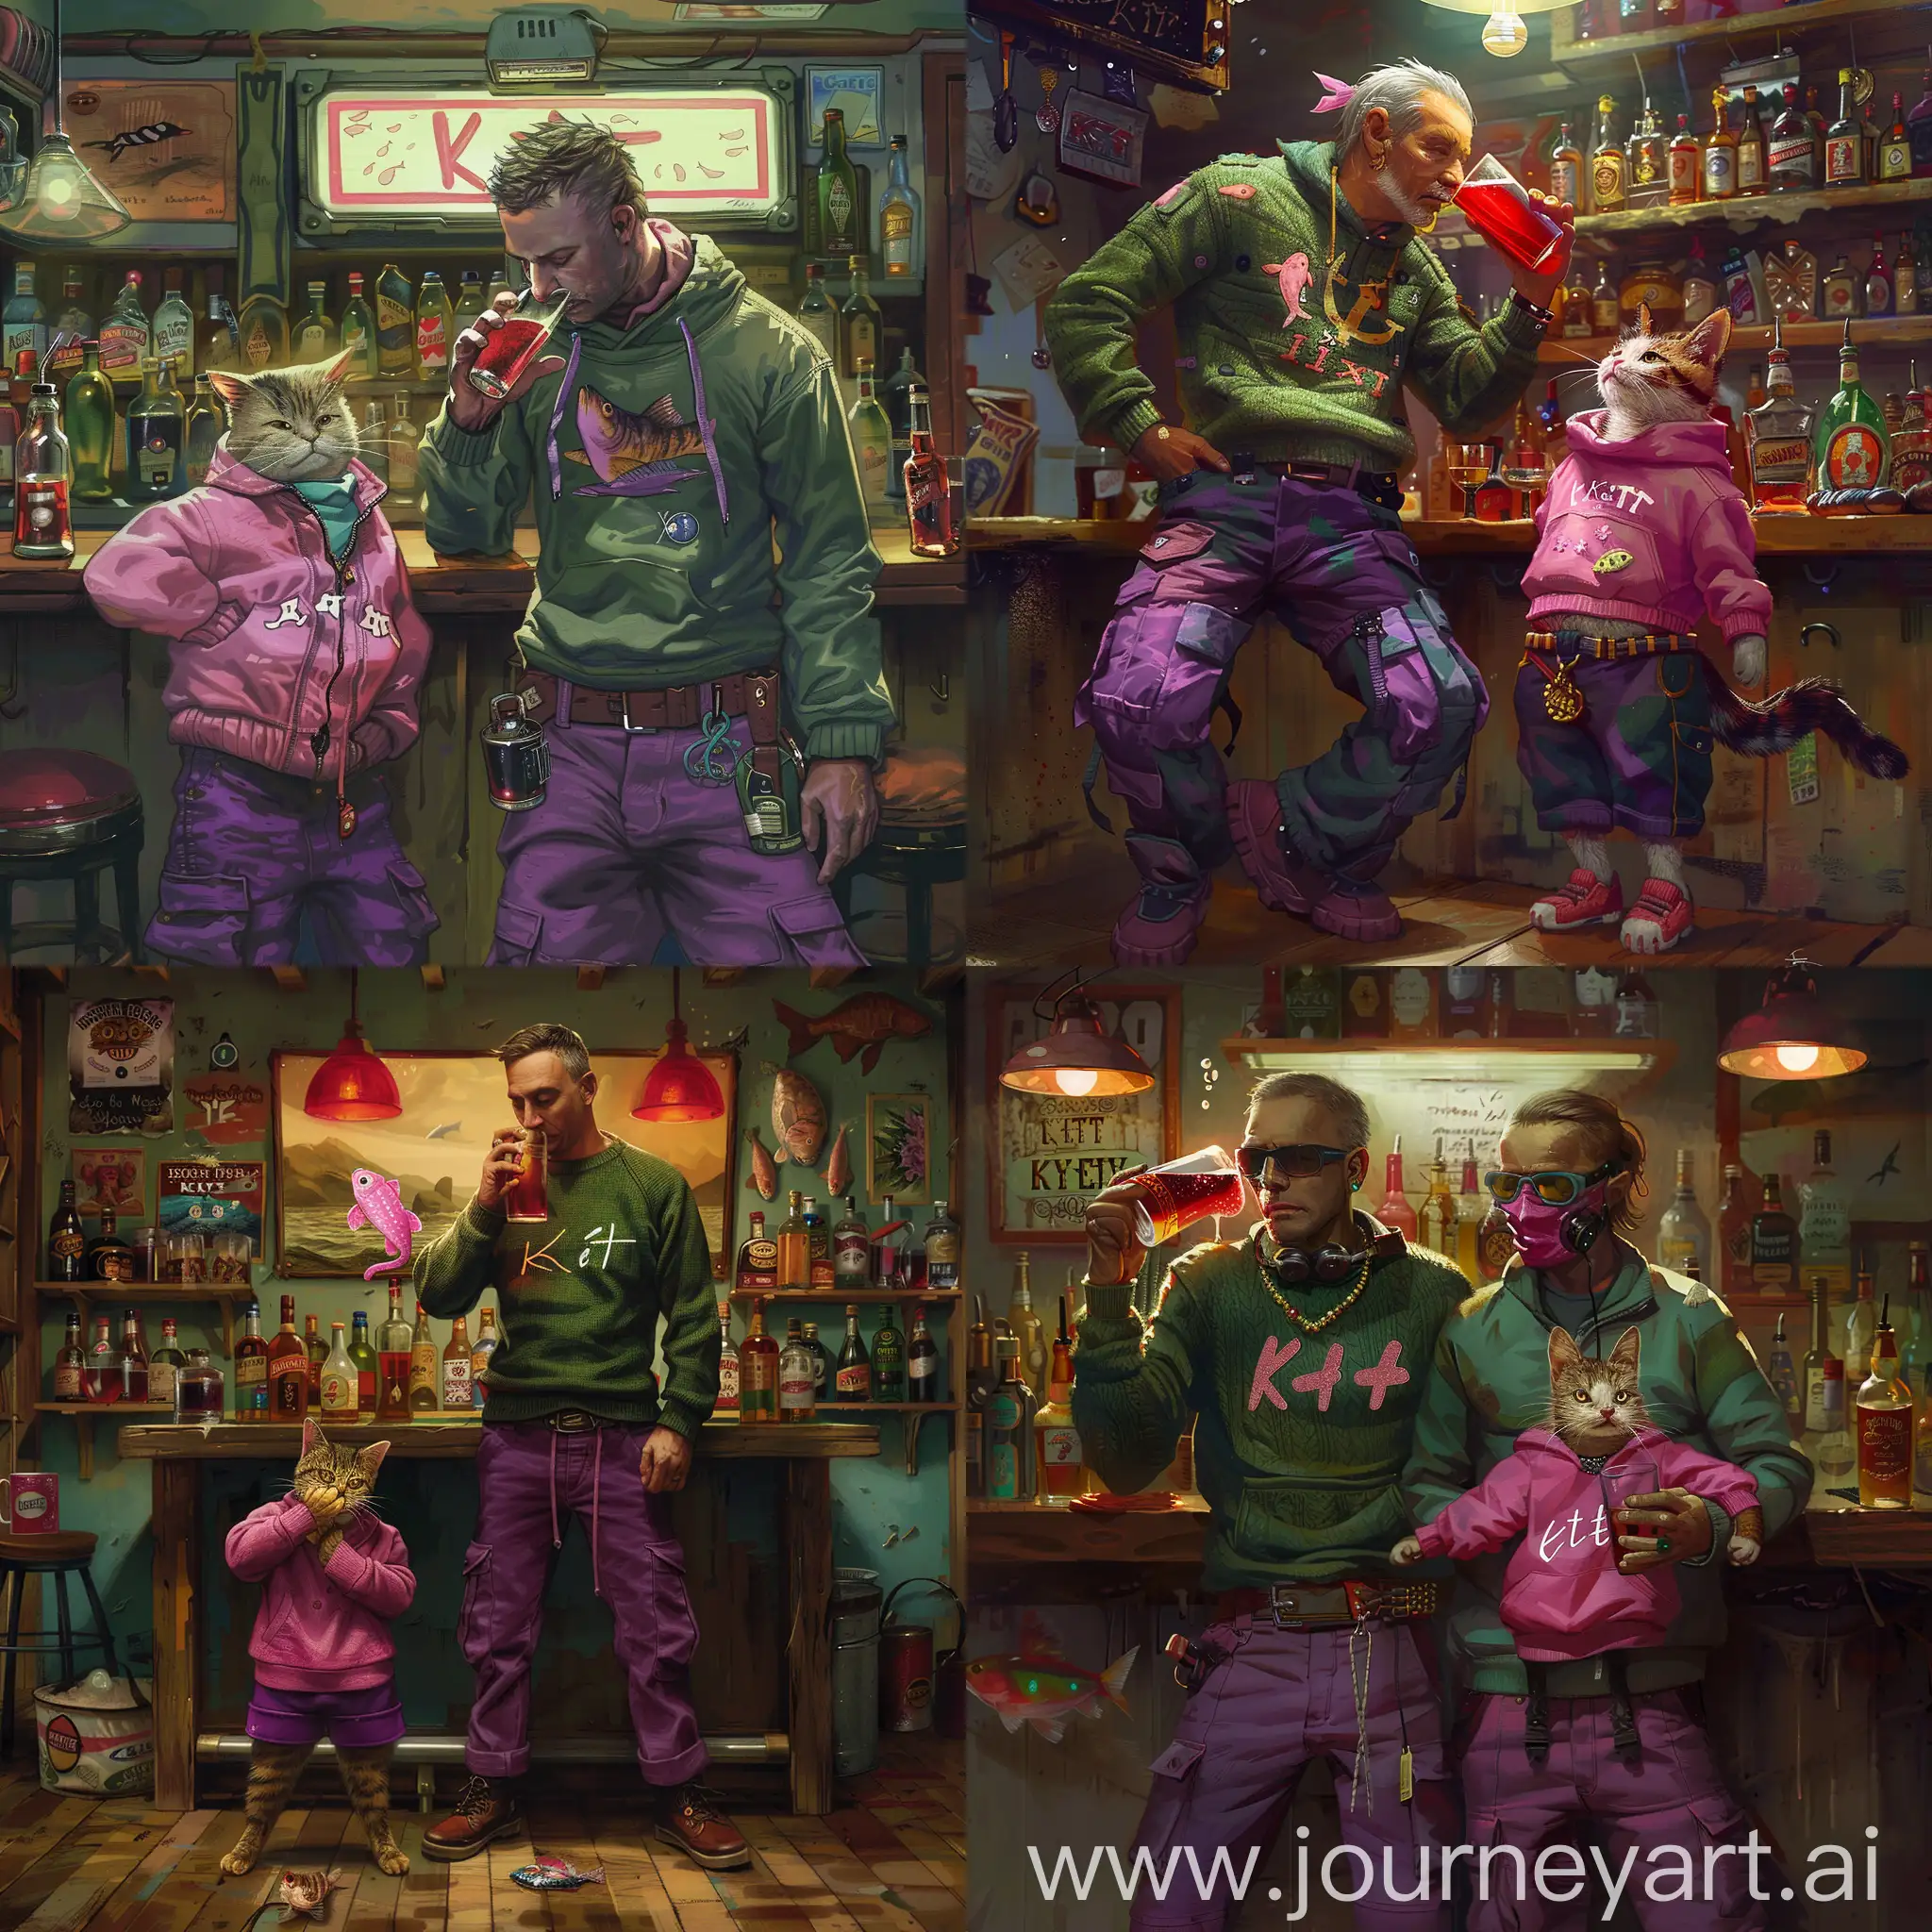 Man-Drinking-Red-Alcohol-with-PinkClothed-Cat-and-Green-Sweater-Purple-Cargo-Outfit